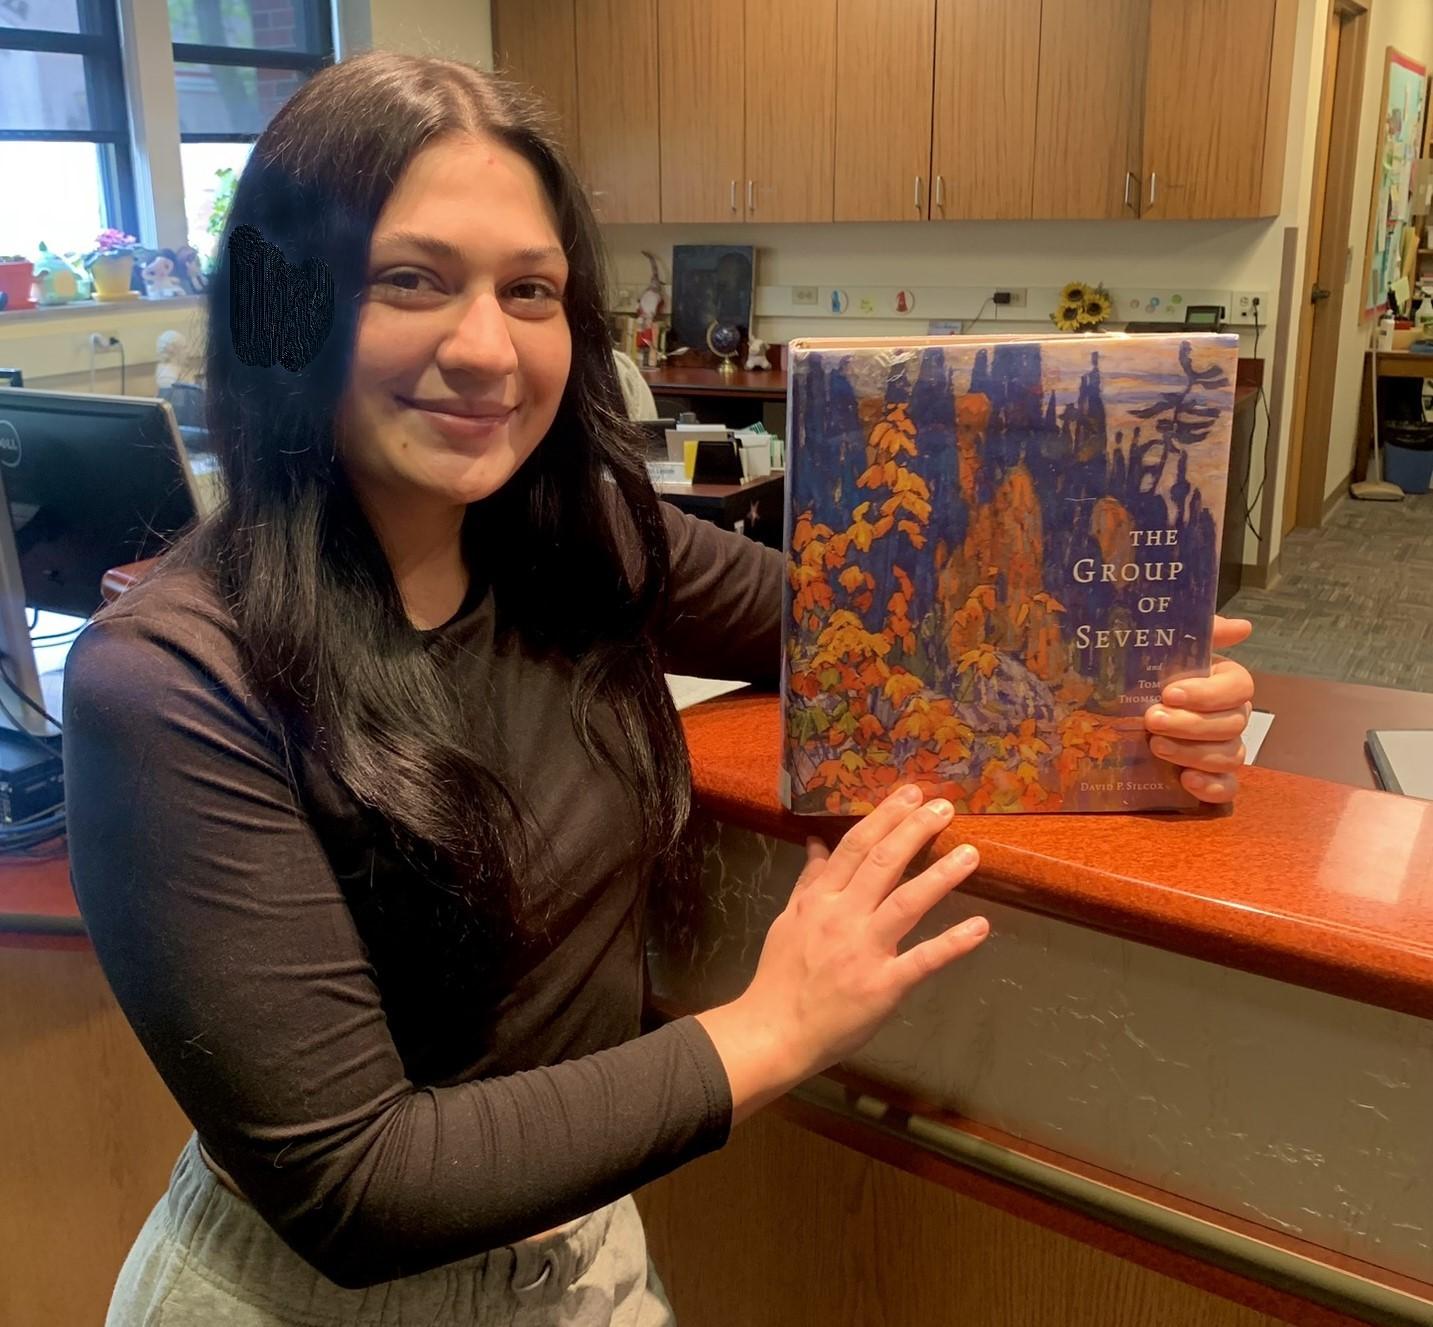 Gretchen Cortez holding the book The Group of Seven and Tom Thomson